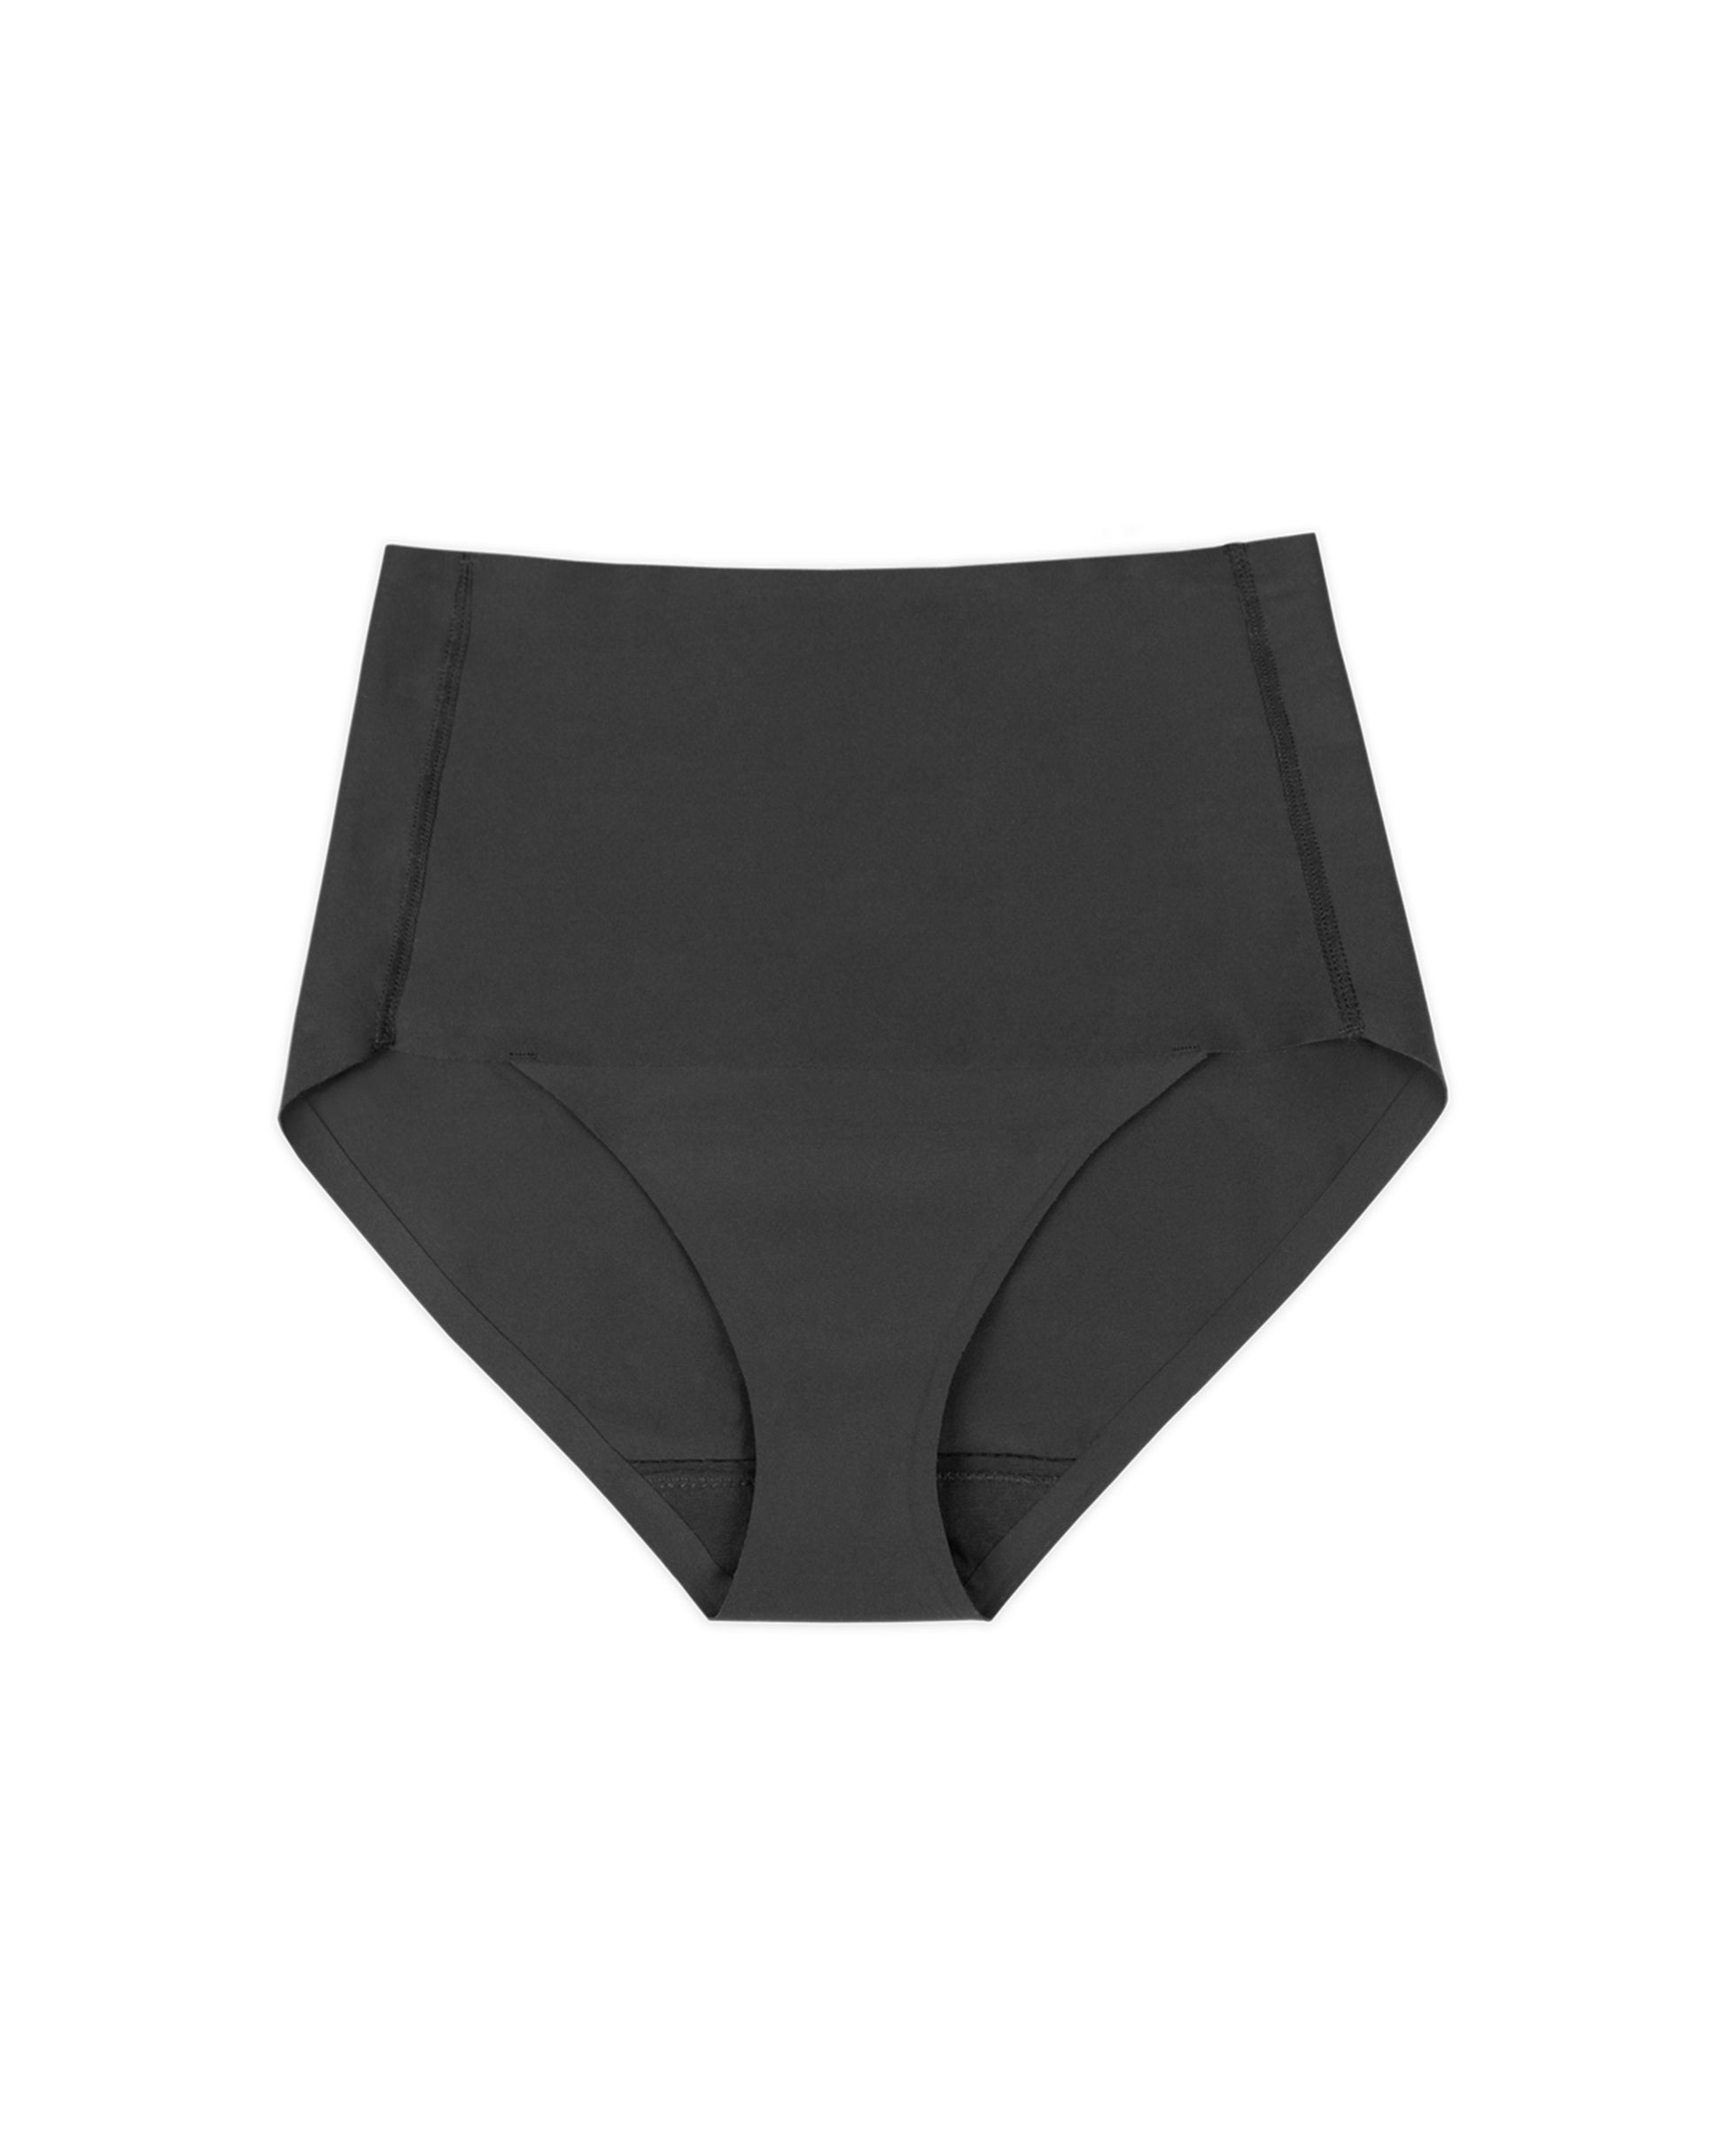 Fashion (Skin)New High Waist Thermal Panties For Women Flat Belly Shaping Panties  Seamless Boxer Safety Shorts Period Menstrual Underwear Lady SCH